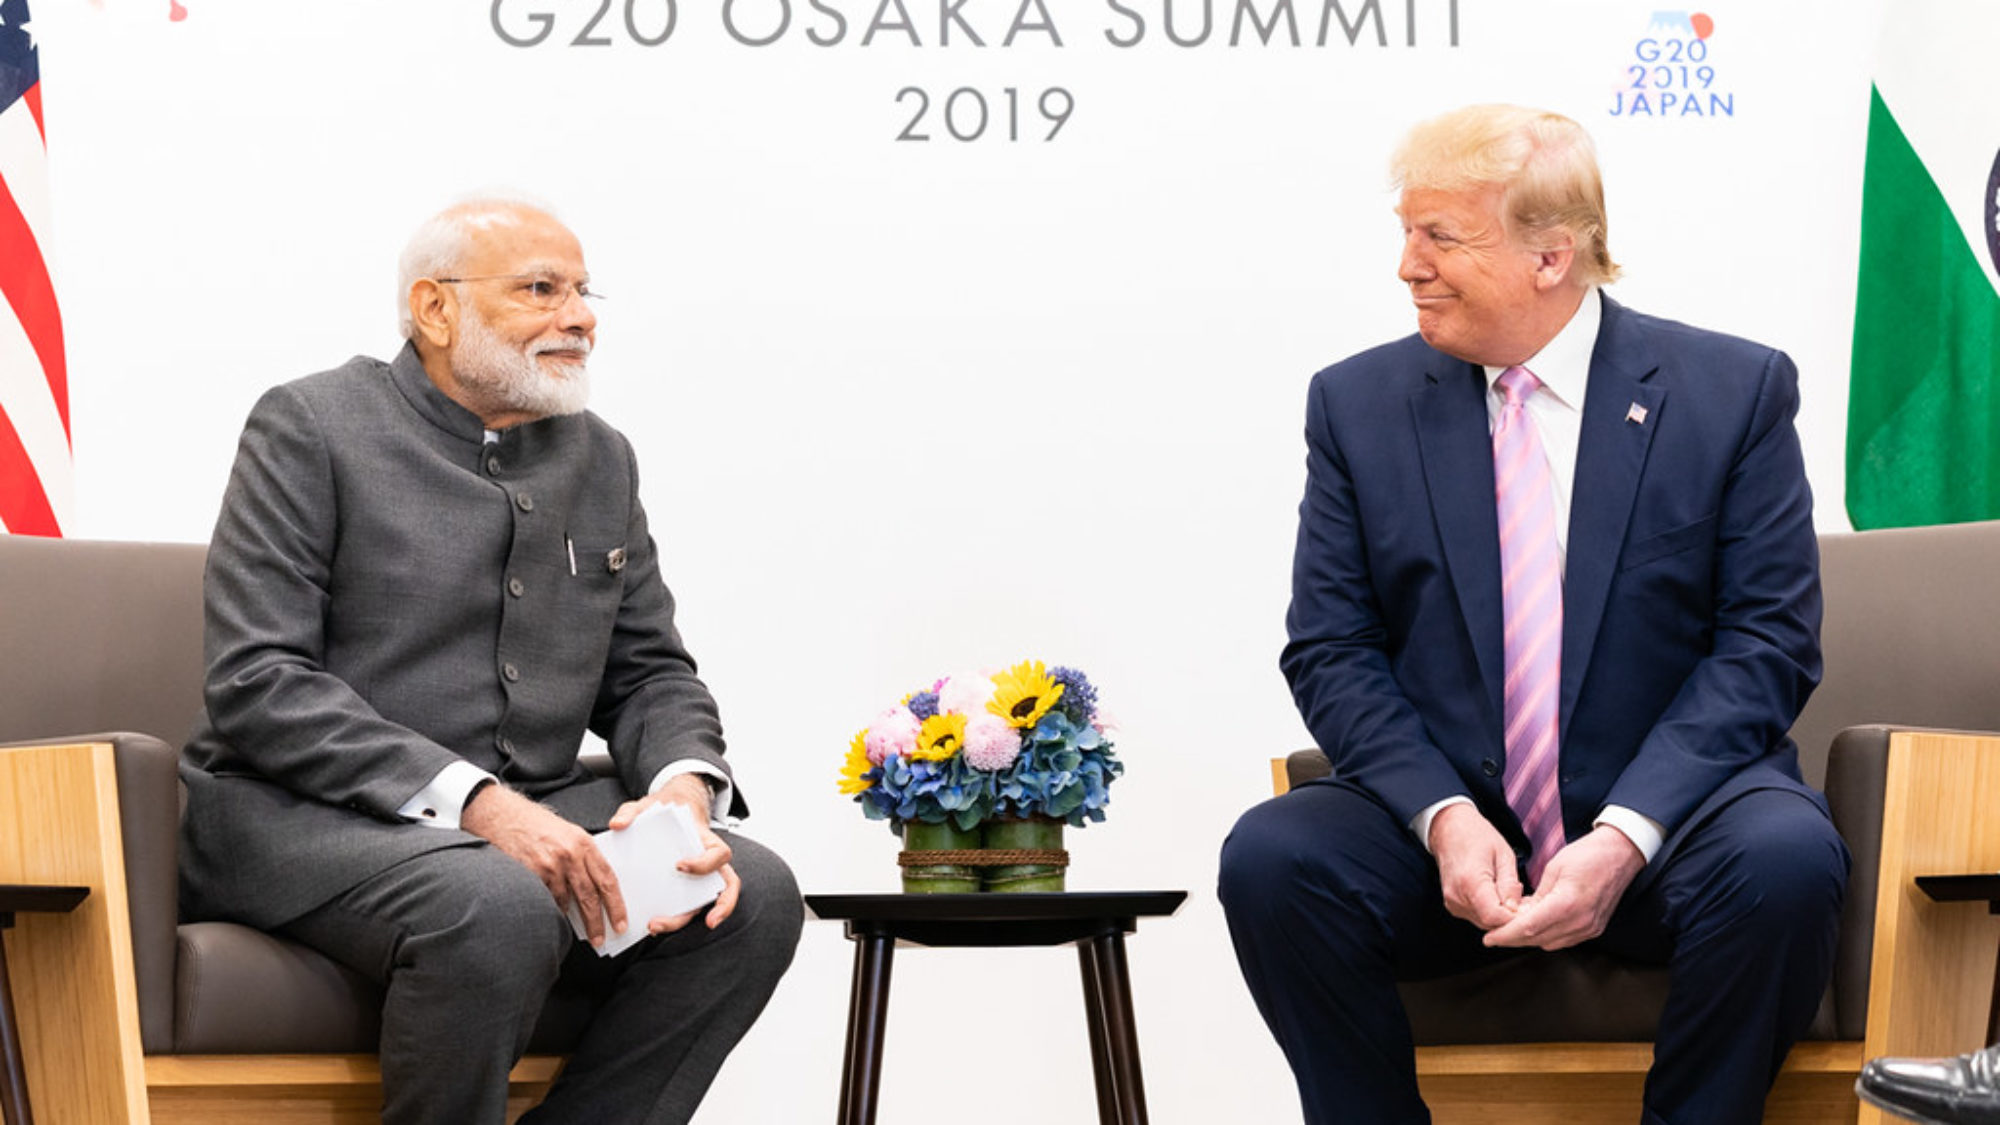 U.S. President Donald Trump and Indian Prime Minister Narendra Modi shake hands at the 2019 G20 Conference in Osaka, Japan